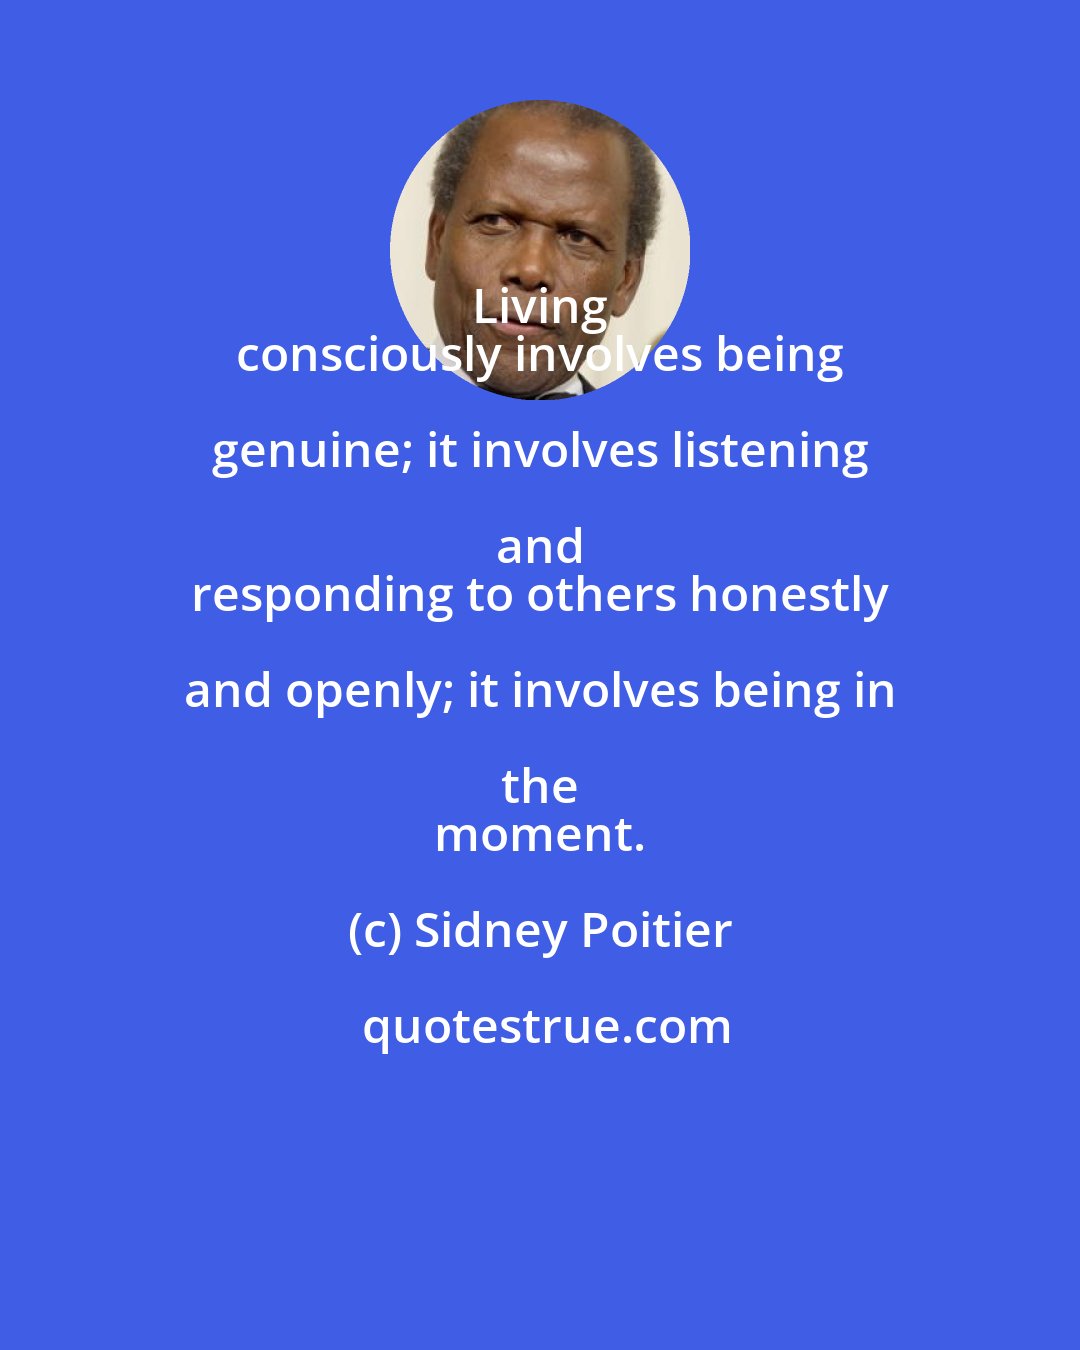 Sidney Poitier: Living 
 consciously involves being genuine; it involves listening and 
 responding to others honestly and openly; it involves being in the 
 moment.